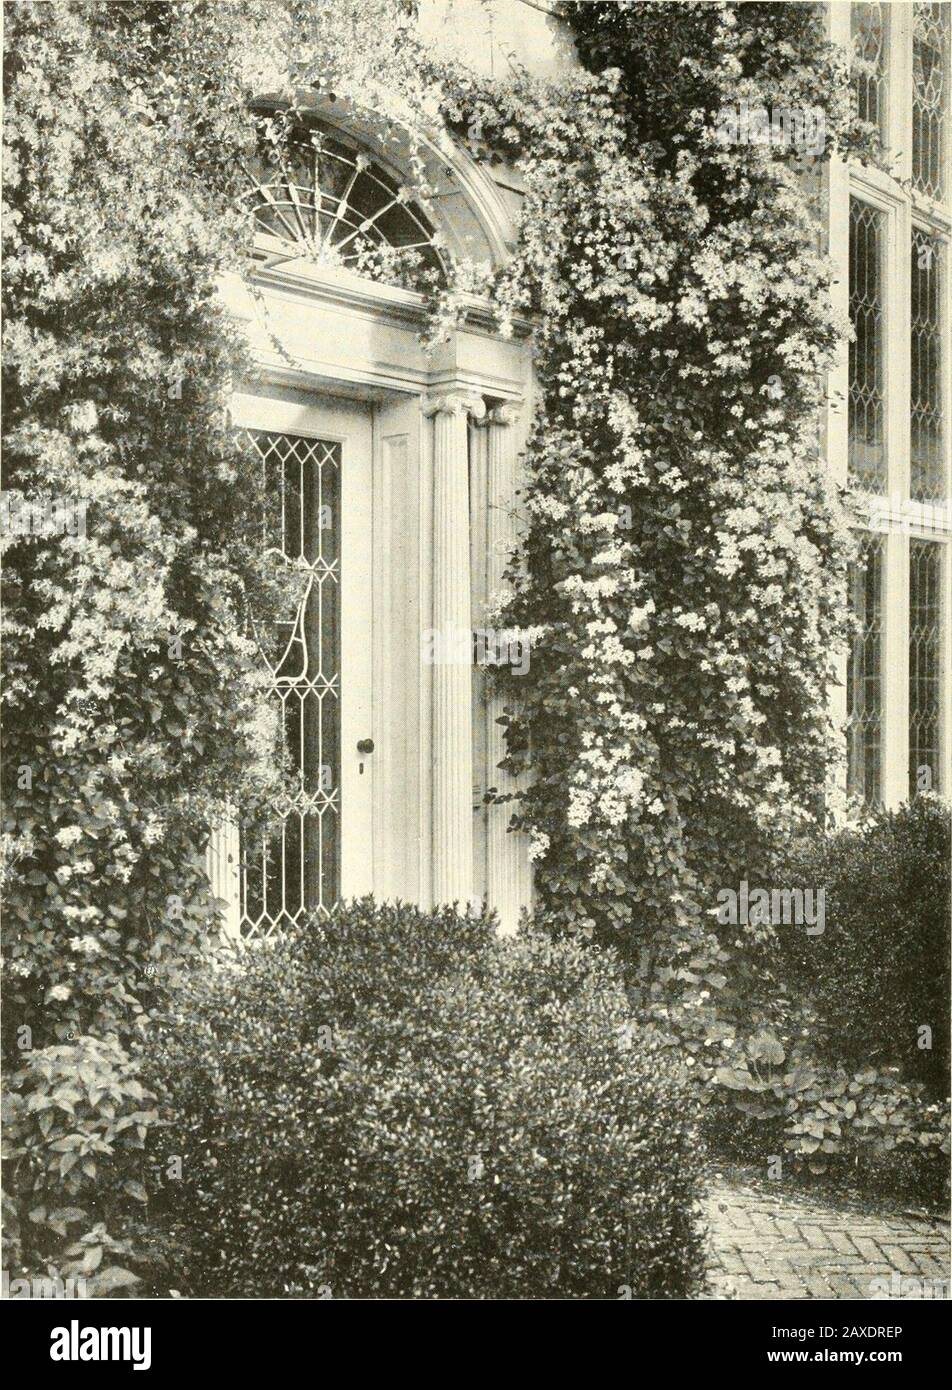 The livable house, its garden . APPROPRIATE PLANTING lOR AGARDEN DOORWAY House of Mr. James C. Breese, at Southampton, Long Island.McKim, Meade and White, Architects %^^^^^^^^^^^^-^^-^^^^^^^^^^^^^^^^k^^^^^M THE LIVABLE HOUSE Its Qarden hy Ruth Dean L^a fid scape Ai^chitect h c i n g V o L u M E 2 ofthe L i V a hie House .V c r i c se (111 (? d h  -A V »i ci r 6/J/ h // /? r // ^ Moffat ard am/ Coinpatix T20 West J2nd Street, Ne- ^ork M C MXVI I [^^ ^^^^^^^^^^^^^-^^^l^^^l^l^^^^^^^^^livablehouseitsg01dean Stock Photo